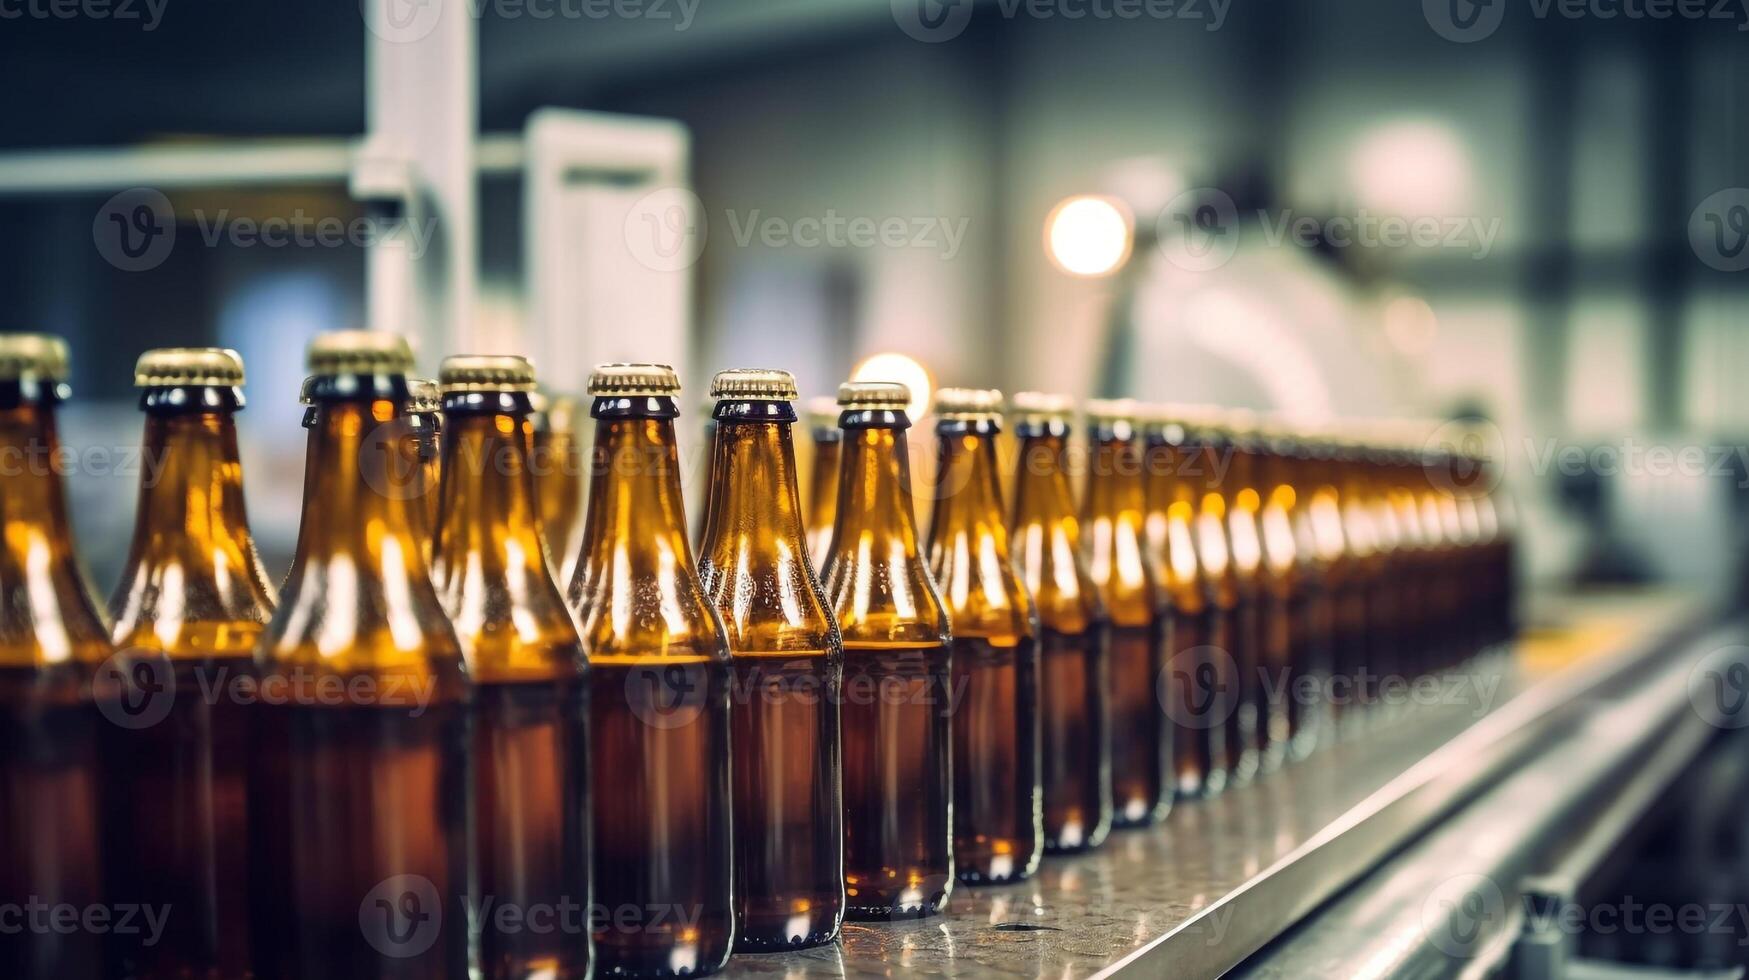 Beer bottles on production line with big machine at Beverage factory interior, machine working bottles production line, photo